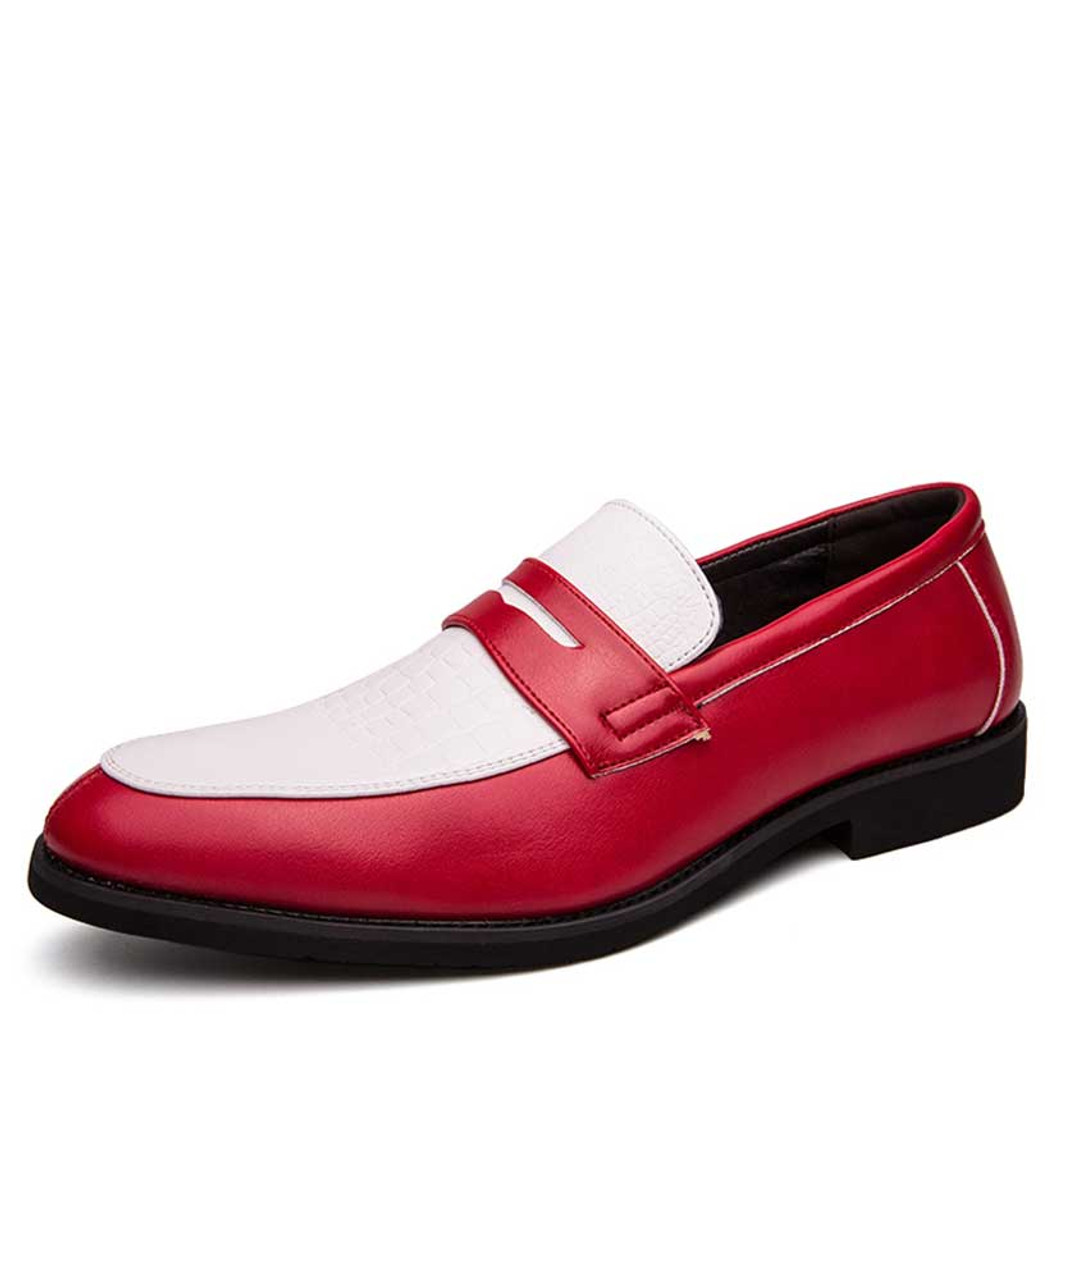 red and white mens dress shoes